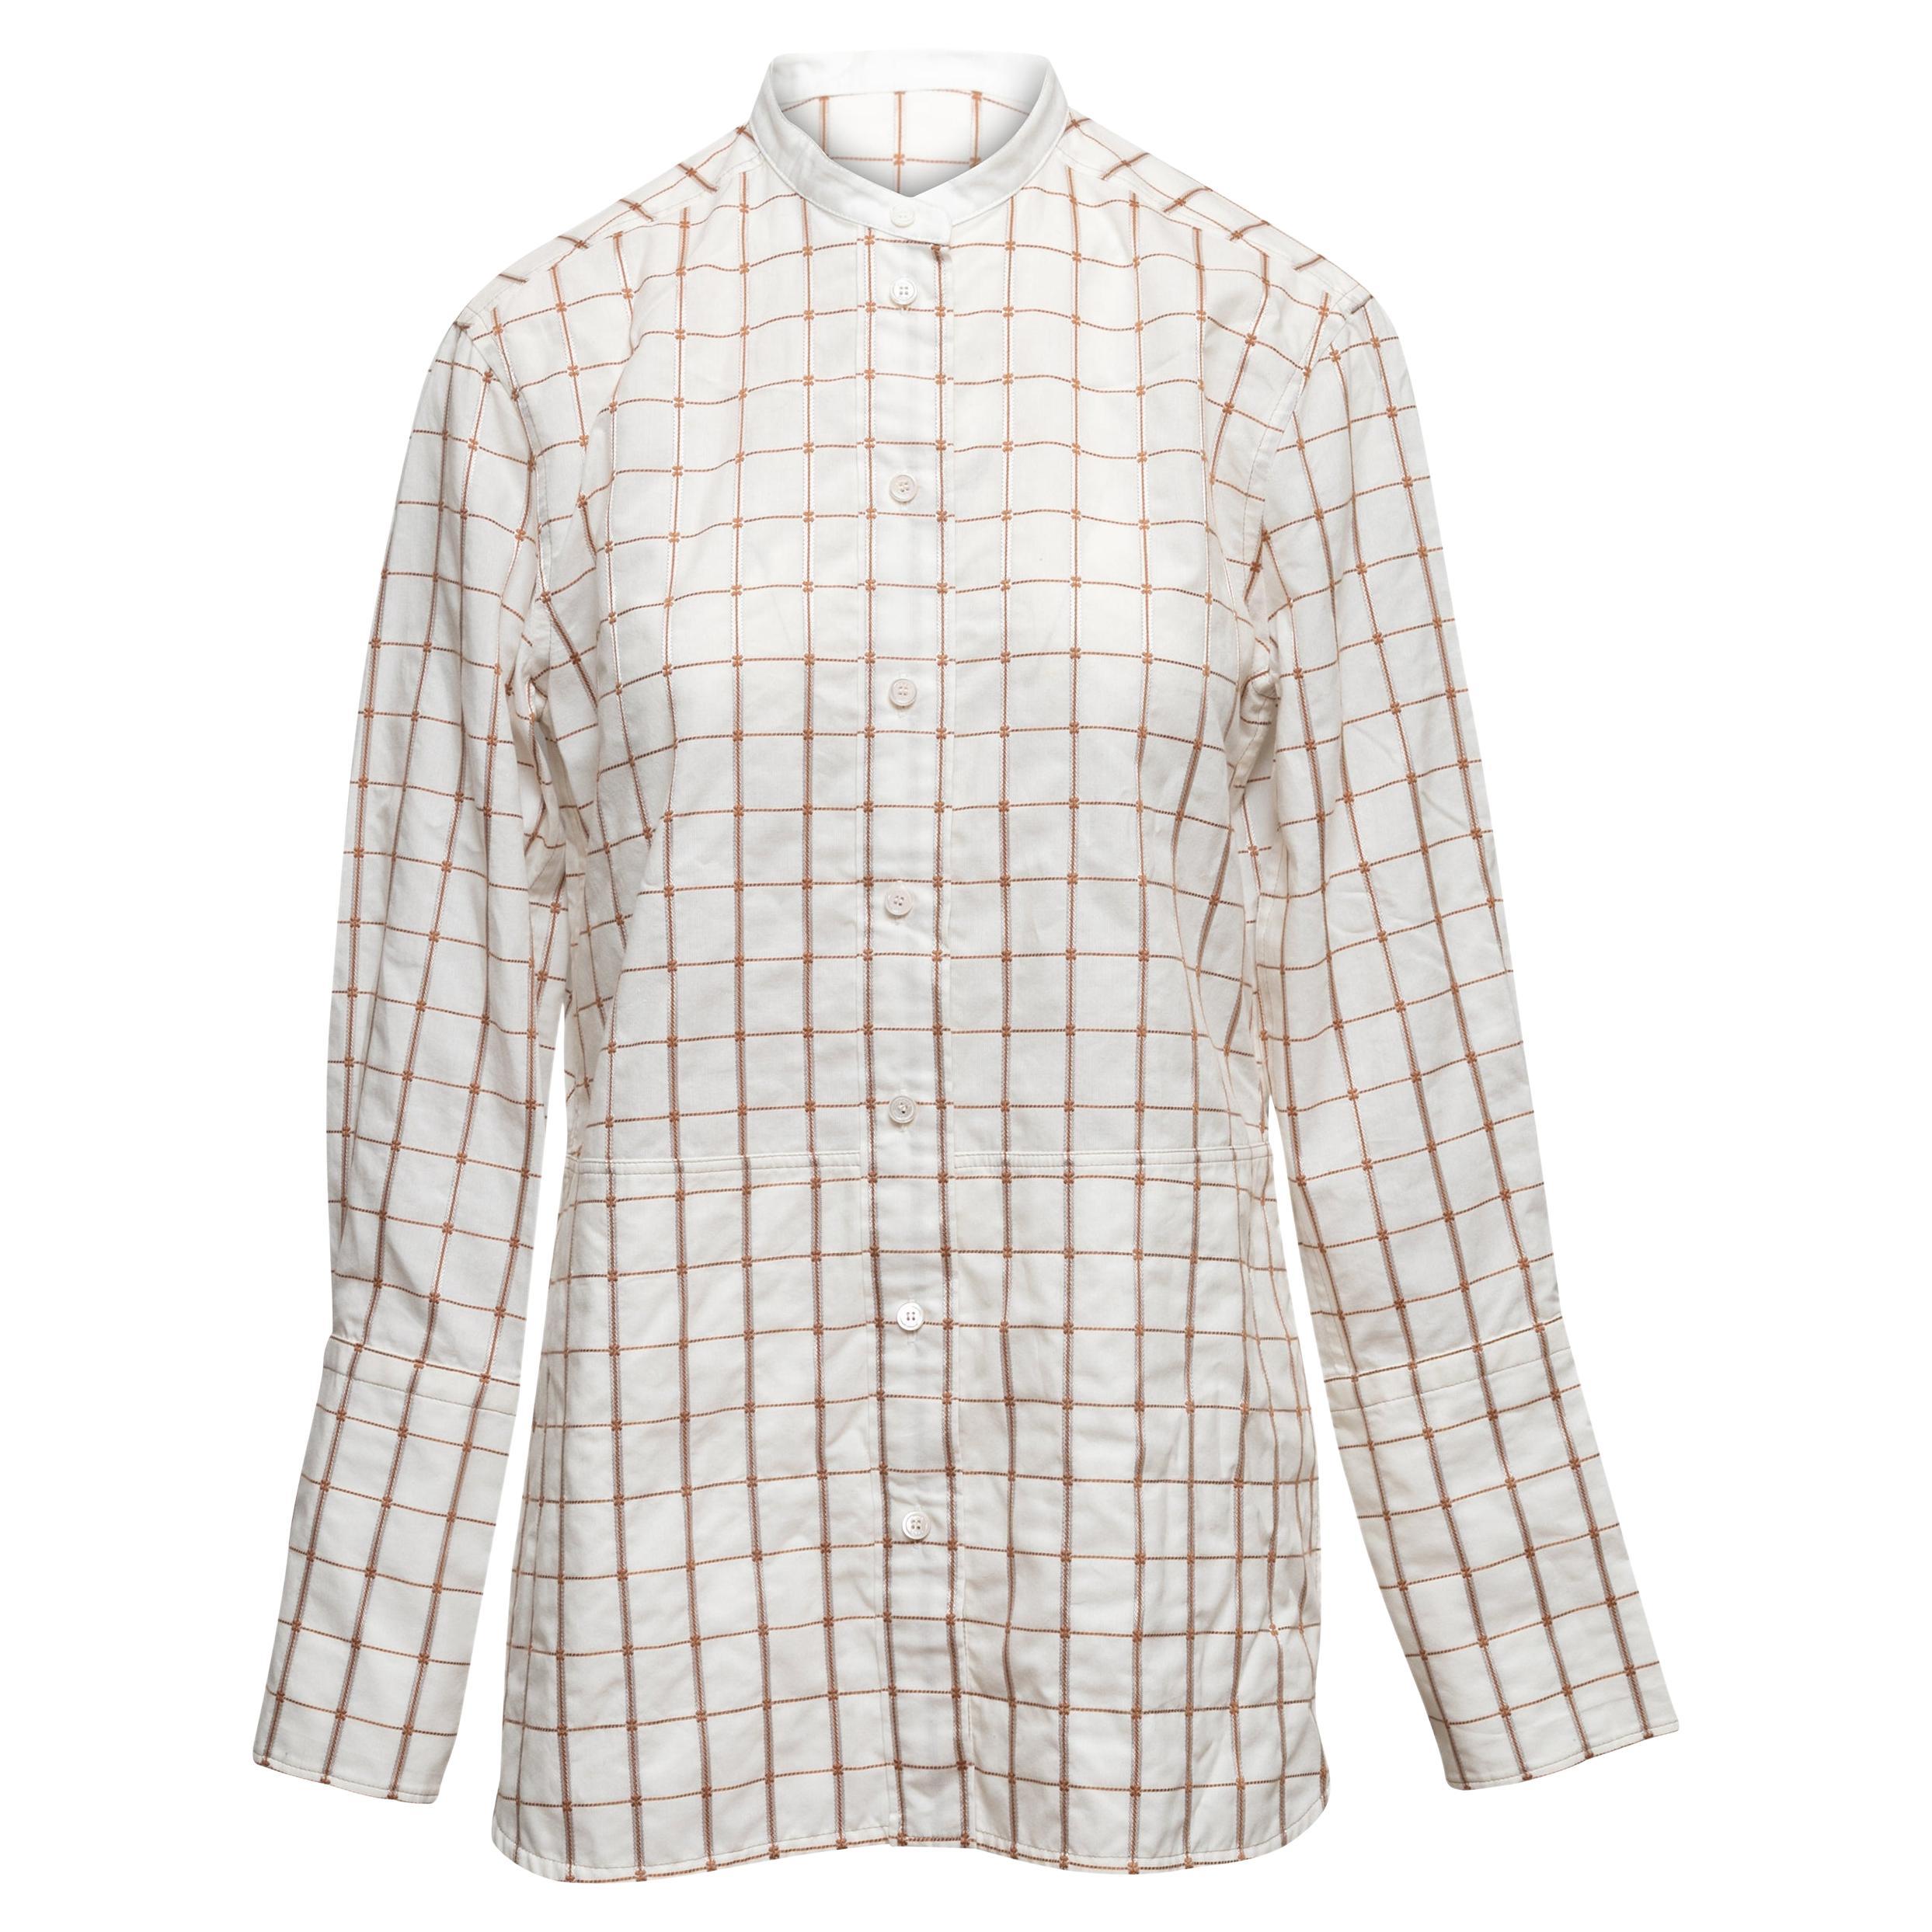 White & Gold Chloe Grid Print Button-Up Top Size FR 40 For Sale